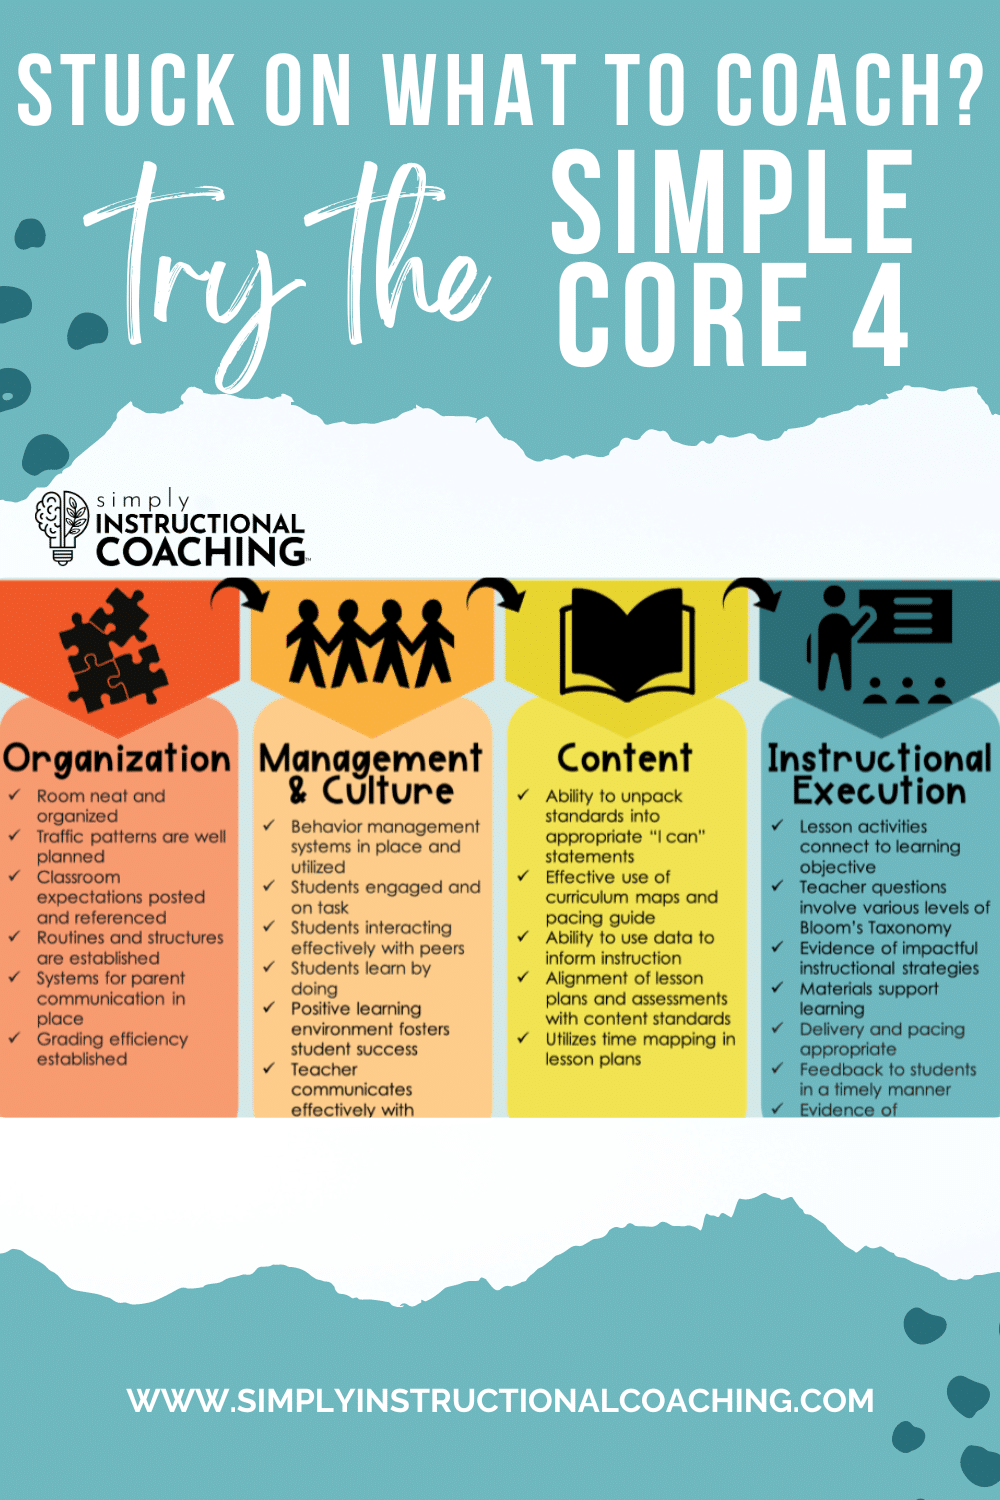 Stuck on WHAT to coach Try the Simple Core 4 with Core 4 graphic